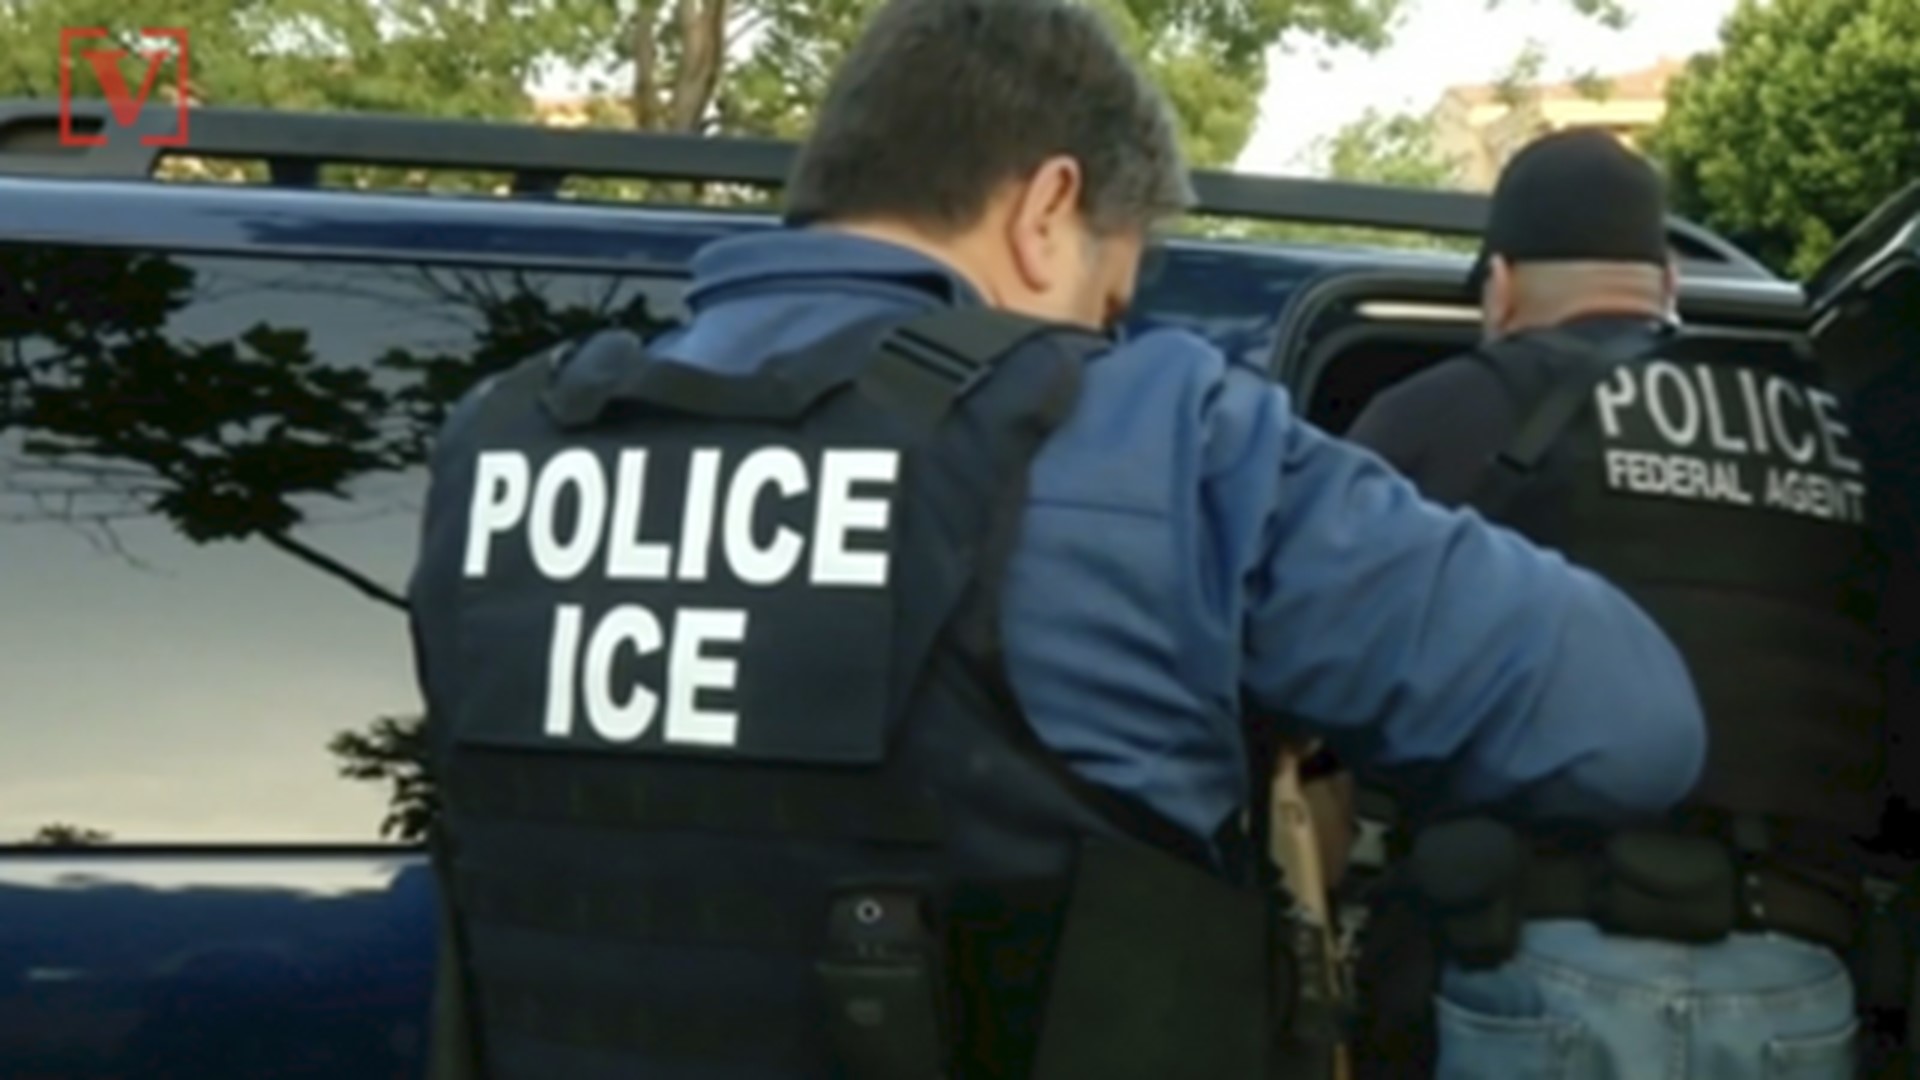 Massive raids targeting undocumented immigrants for deportation are set to begin in just a matter of days. Veuer's Nick Cardona has the latest.